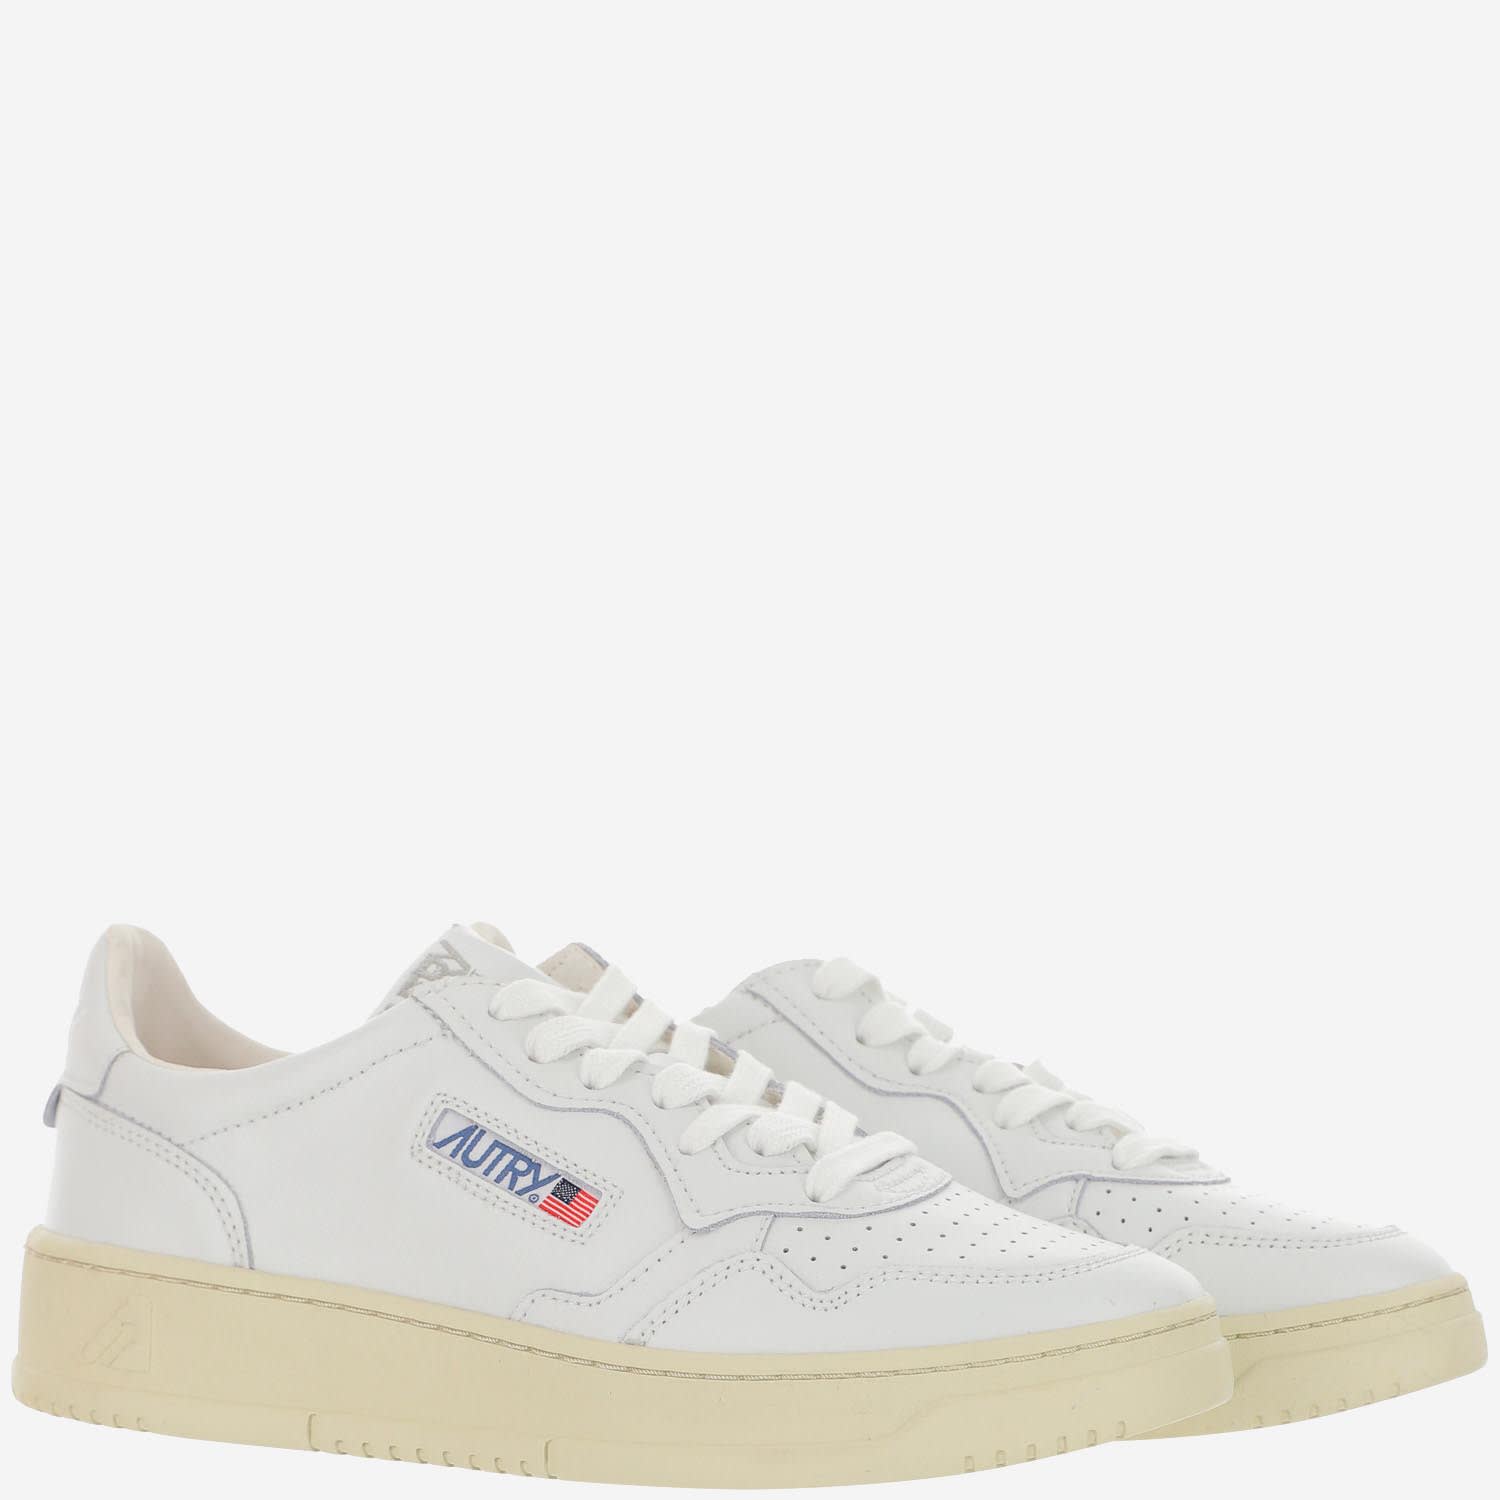 Shop Autry Low Medalist Sneakers In Wht/wht